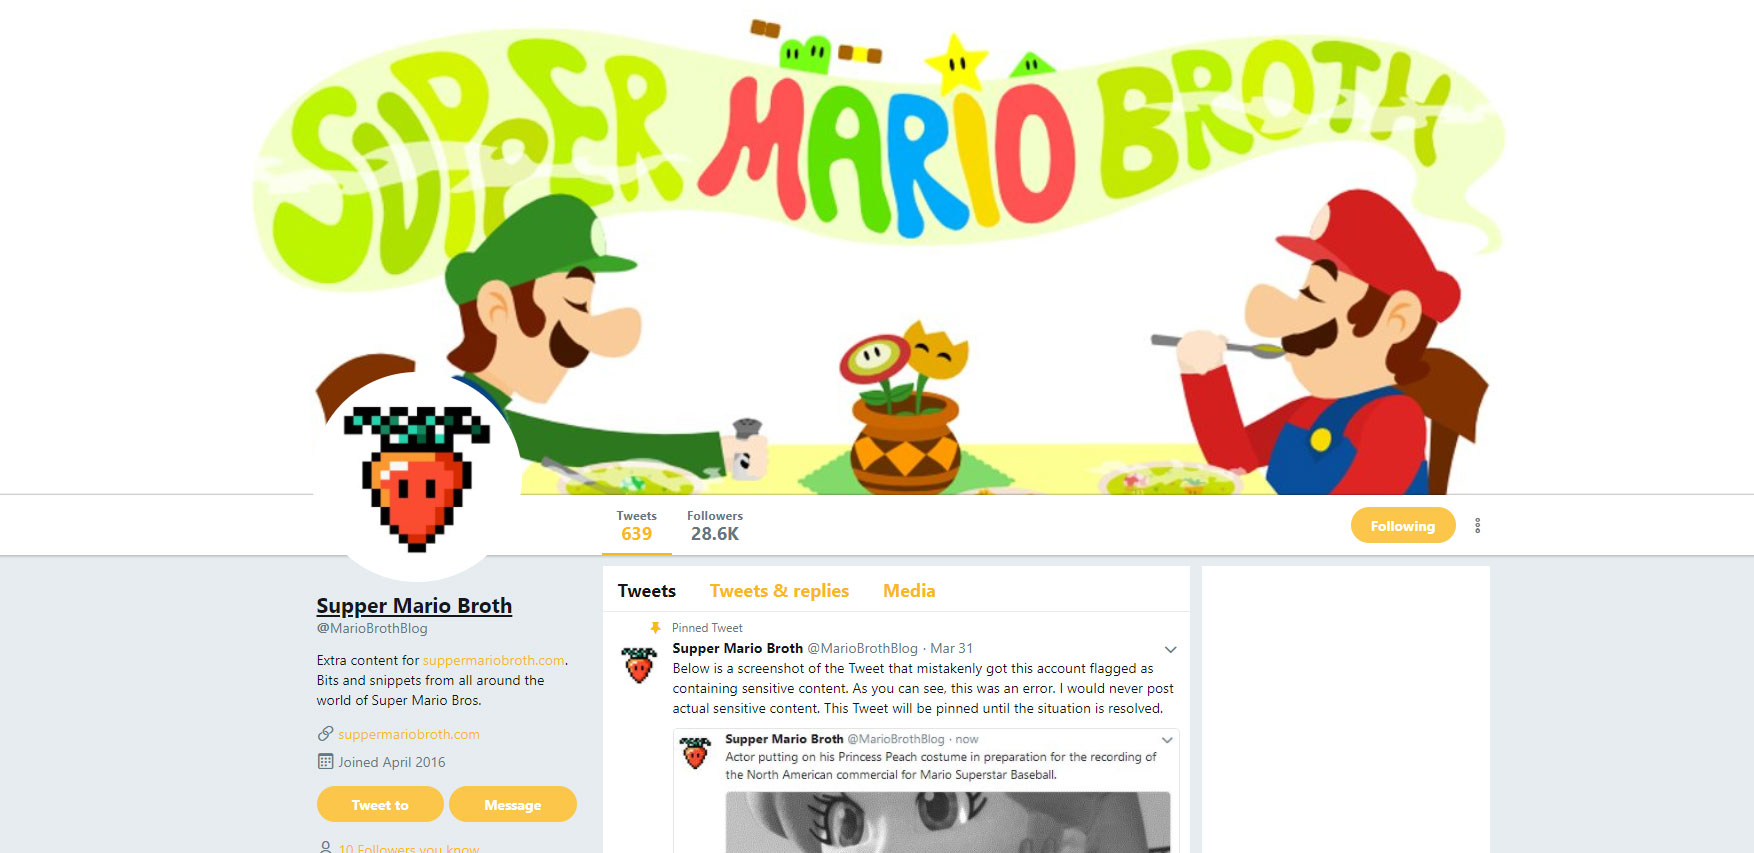 Nintendo Fan Account Flagged On Twitter For Image Of Man Putting On Princess Peach Mask